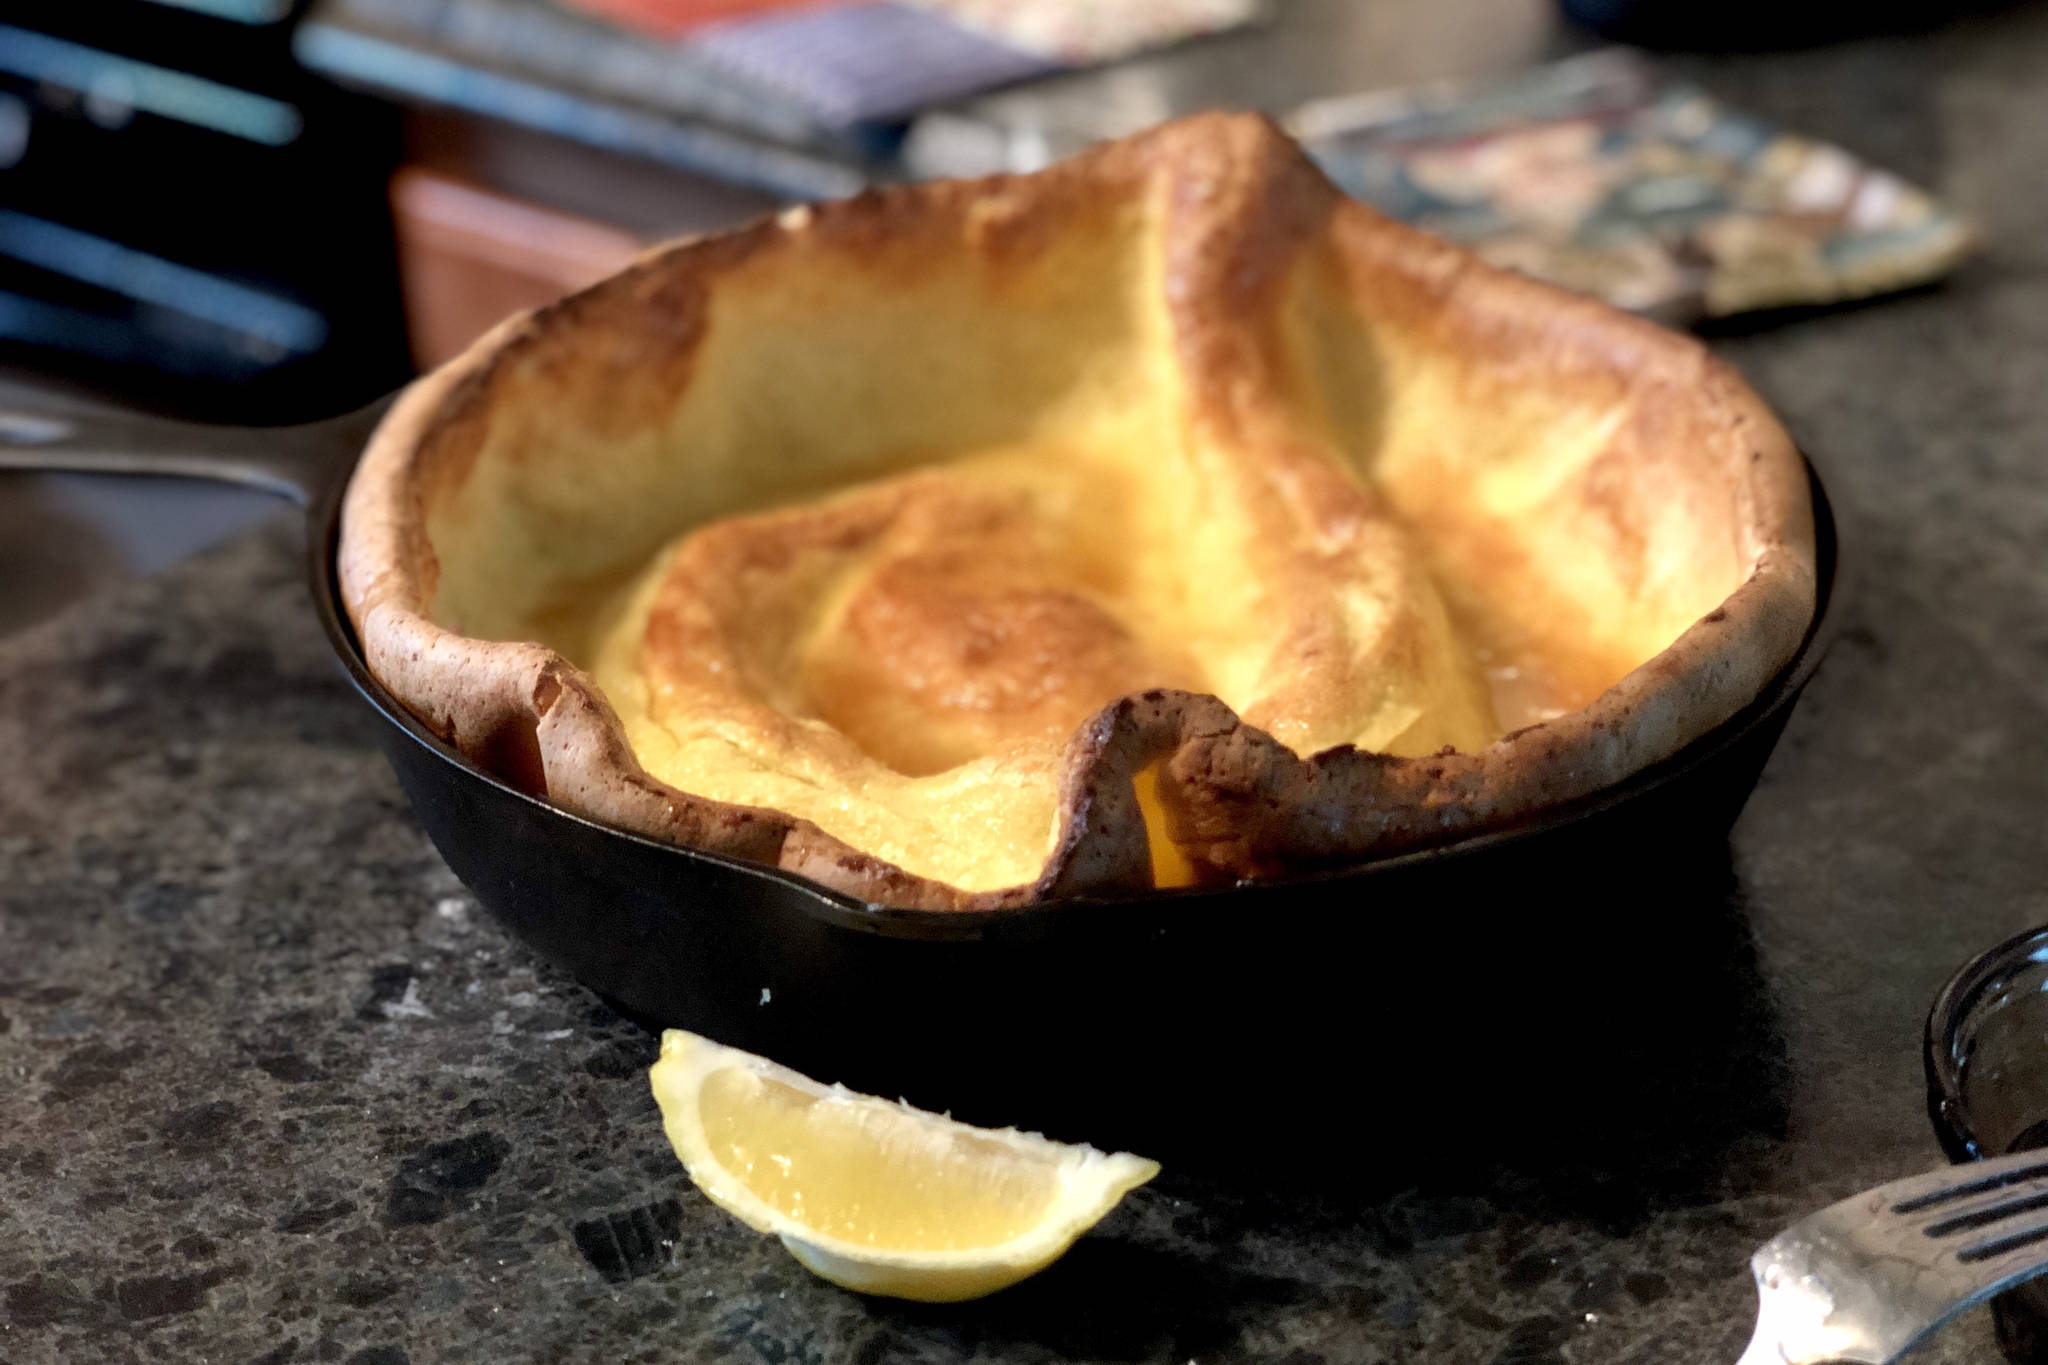 Dutch babies, golden, eggy, puffy pancakes most often baked in a cast-iron skillet, can be paired with sweet or savory ingredients. (Photo by Victoria Petersen/Peninsula Clarion)
Dutch babies, golden, eggy, puffy pancakes most often baked in a cast-iron skillet, can be paired with sweet or savory ingredients. (Photo by Victoria Petersen/Peninsula Clarion)